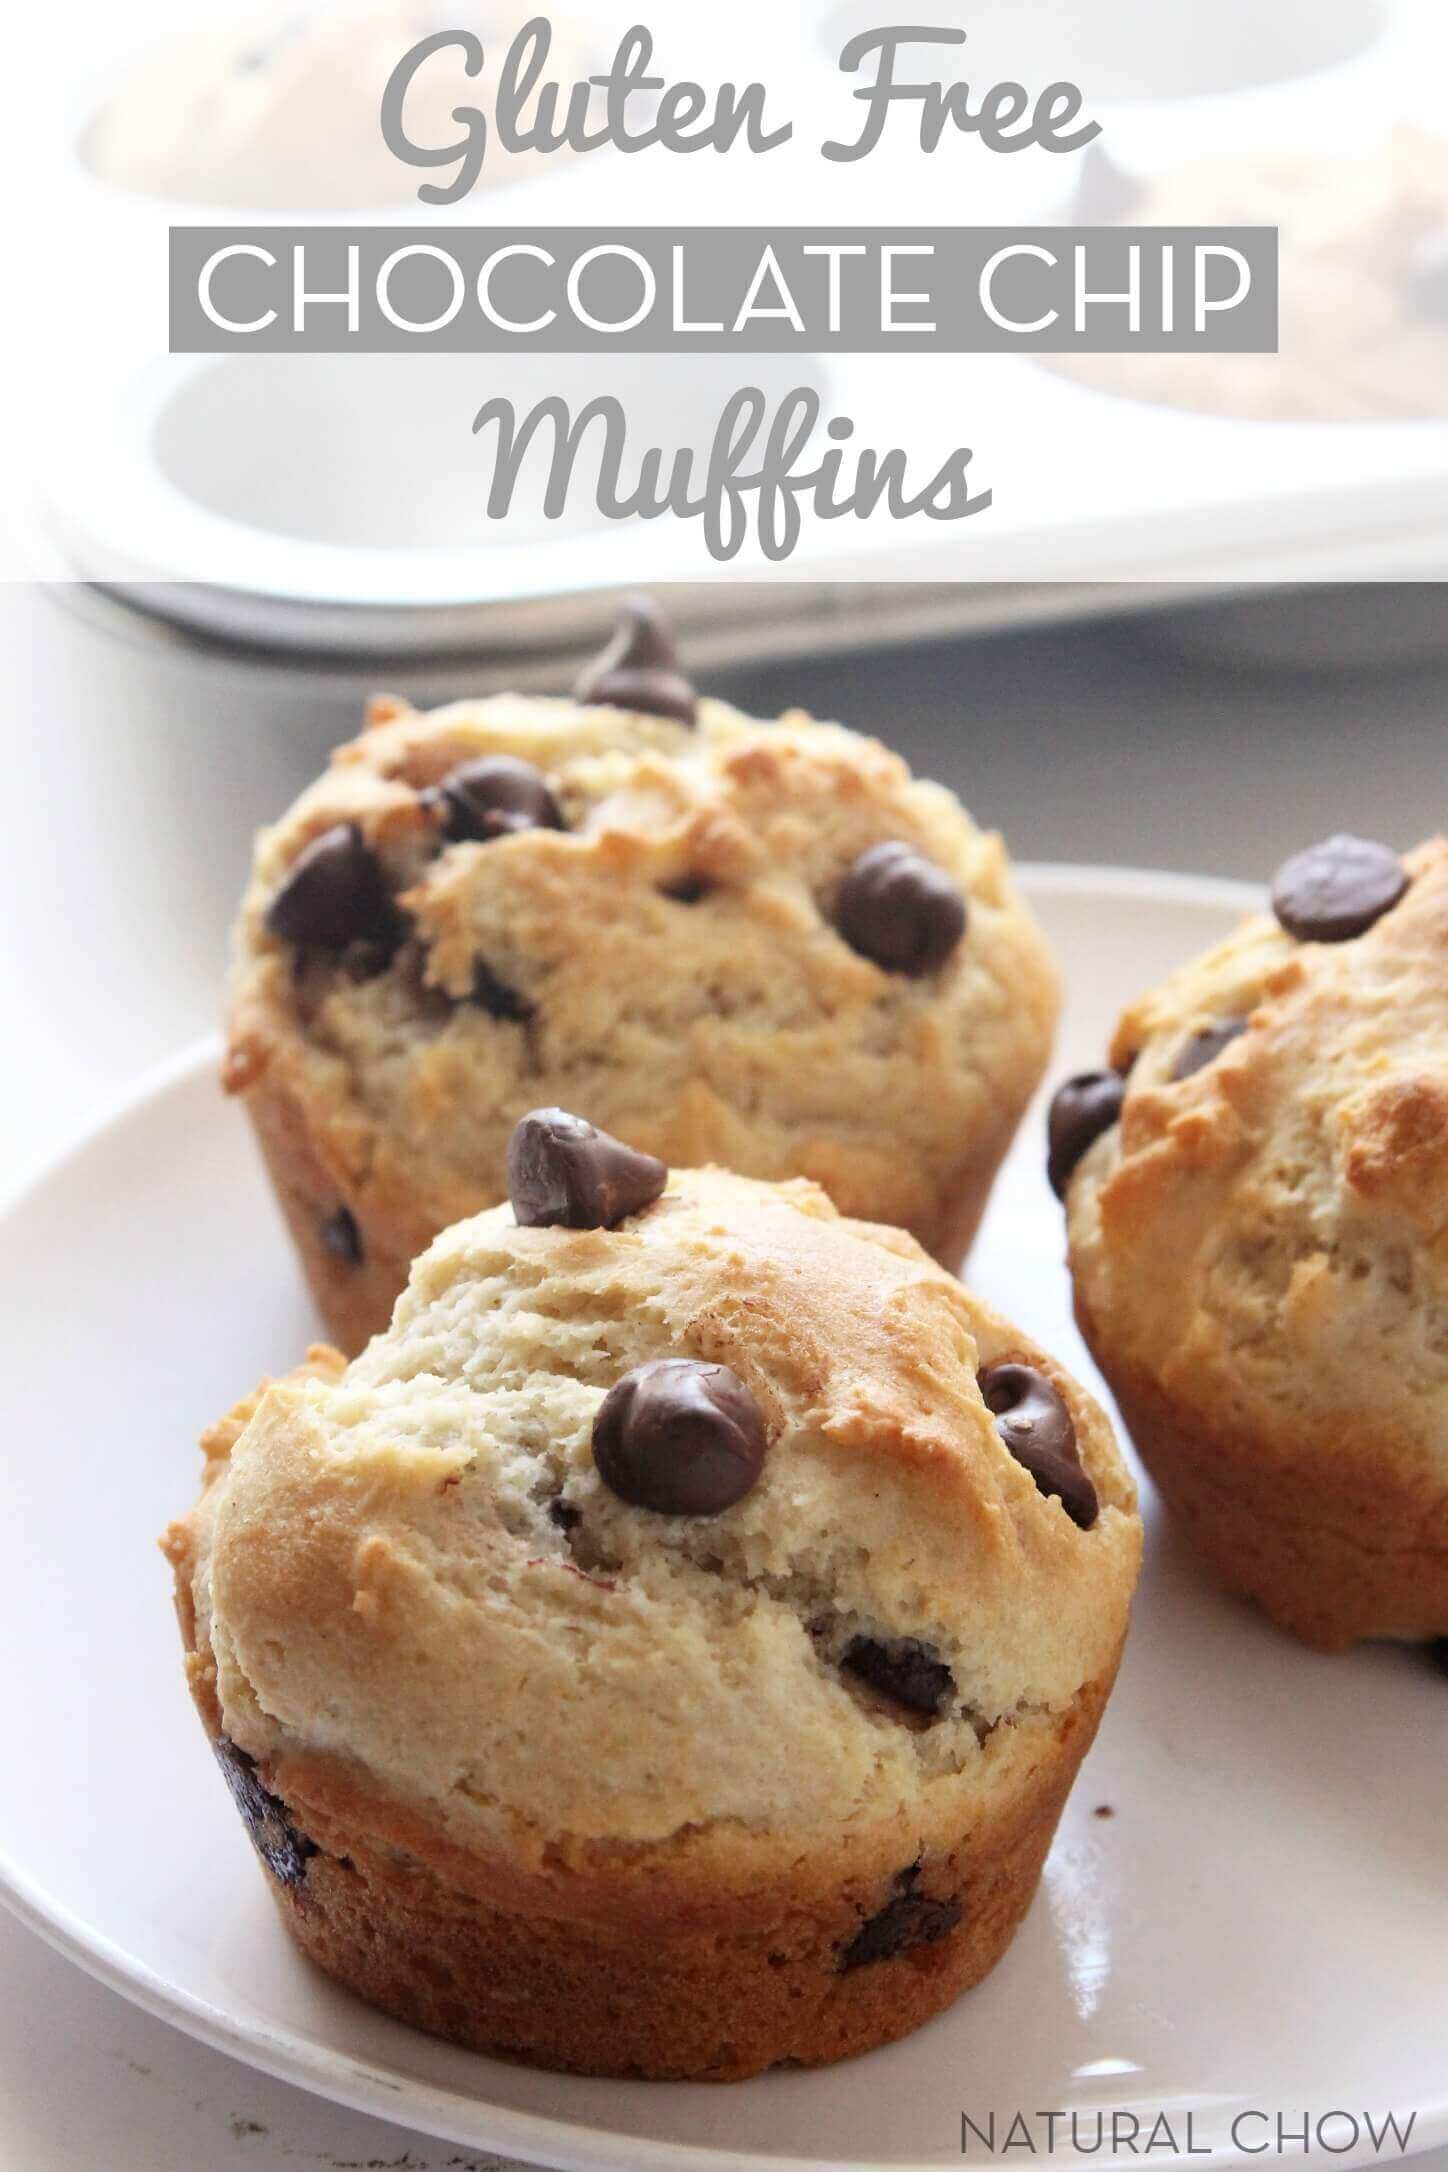 50 Best Gluten-Free Muffin Recipes that are Simple and Easy to Make